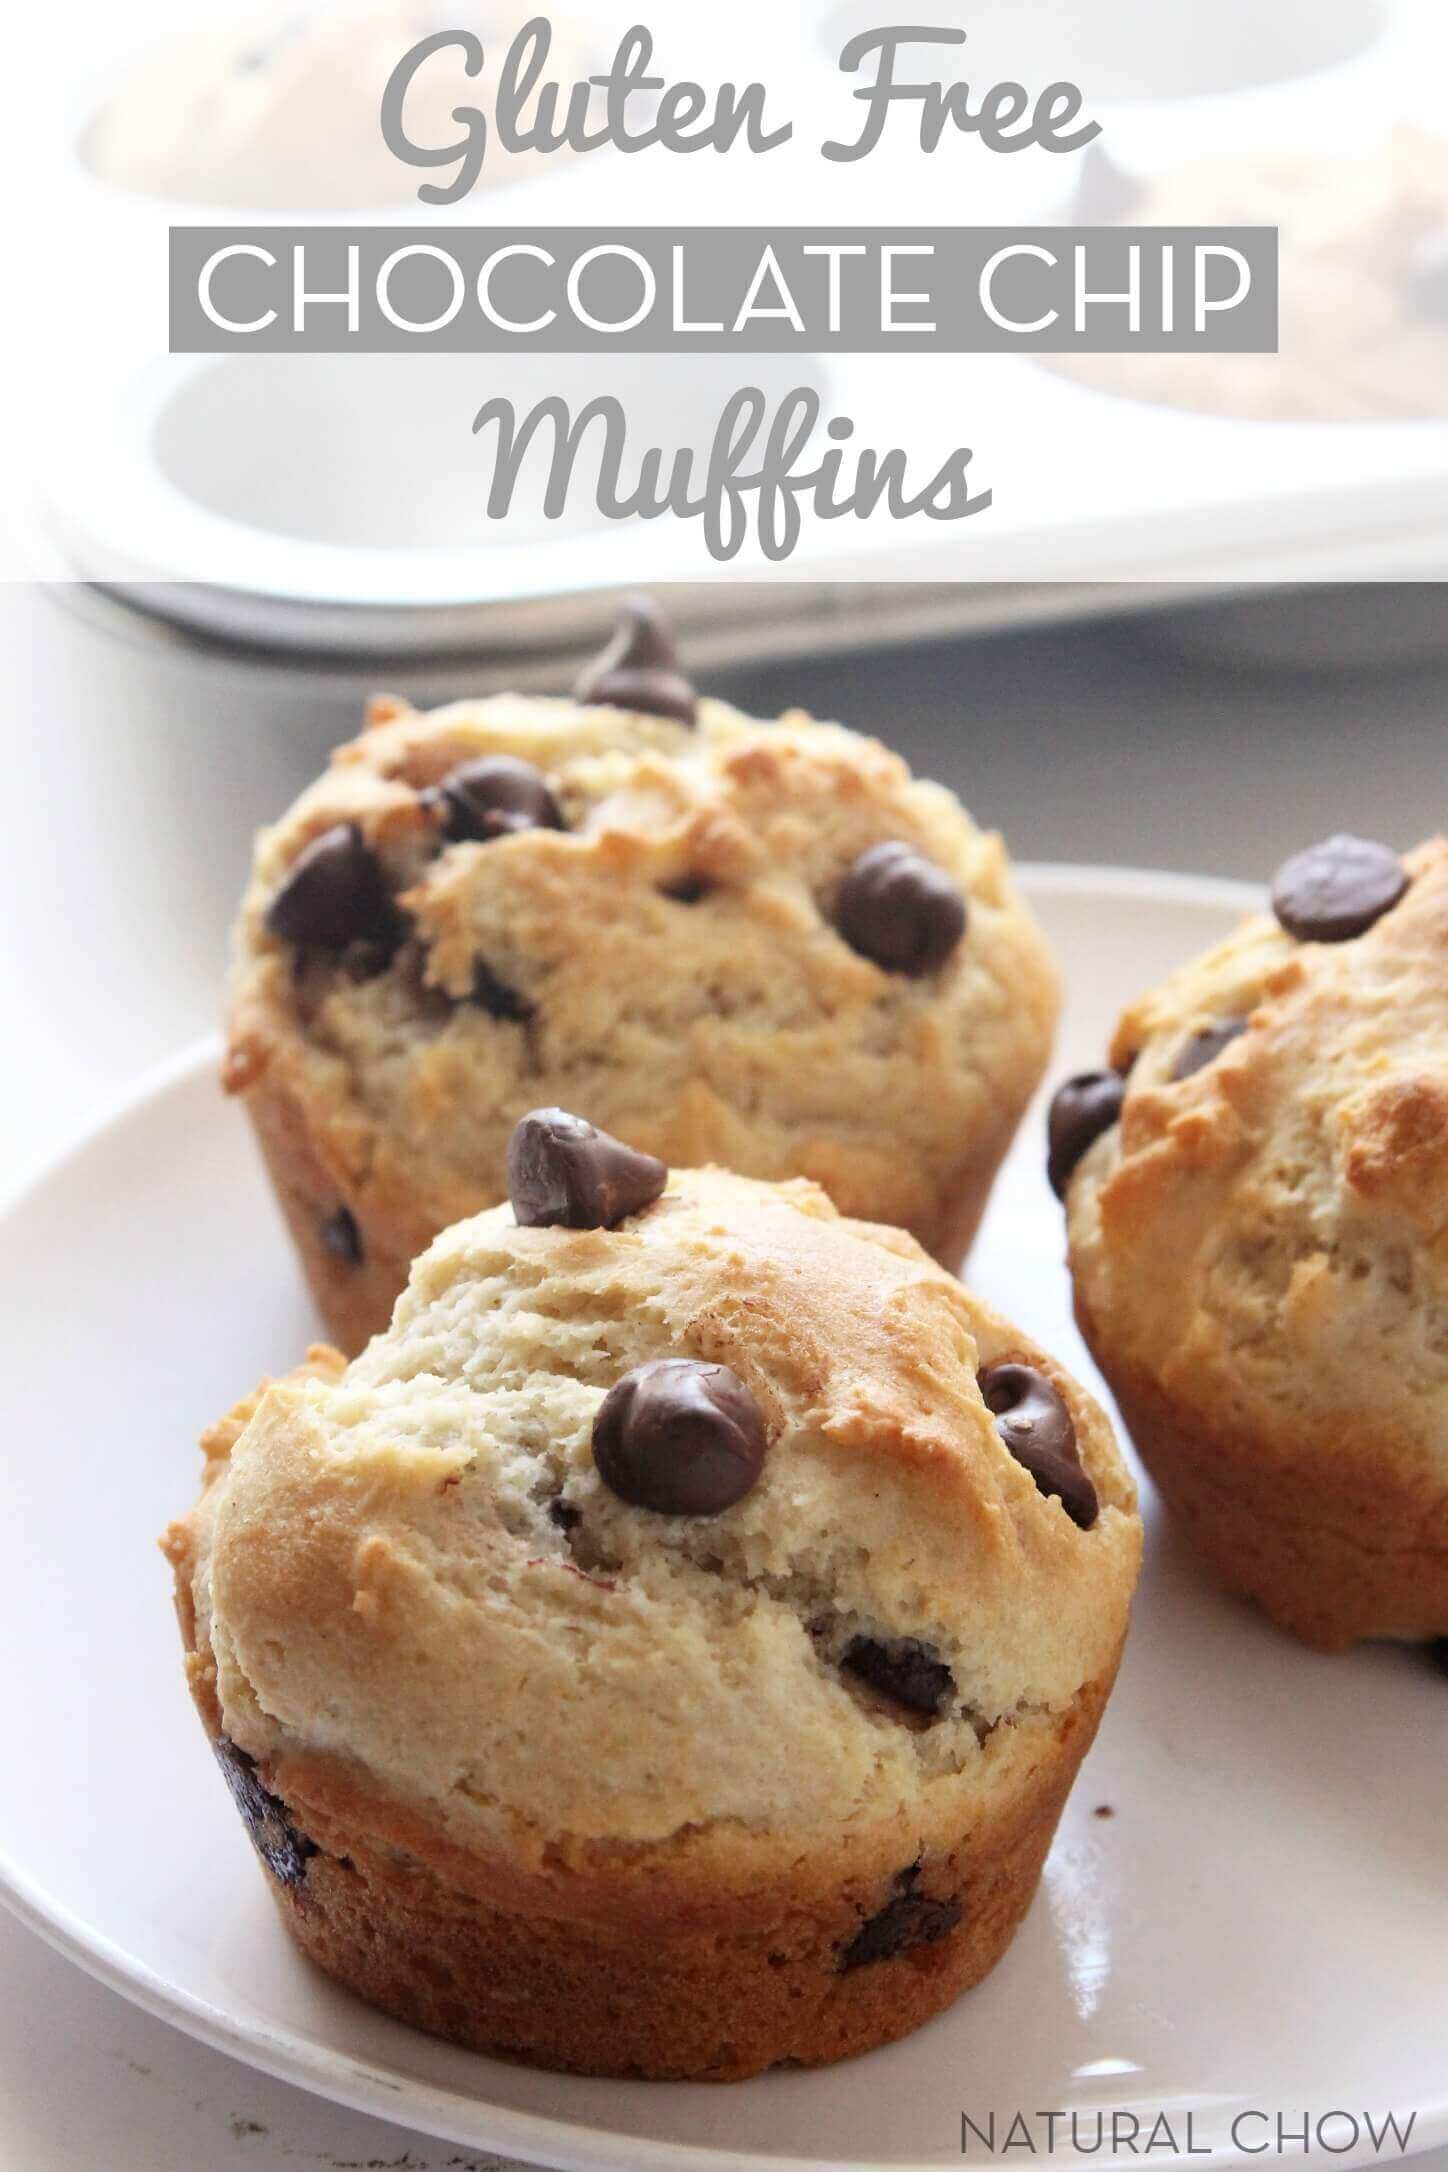 50 Best Gluten-Free Muffin Recipes that are Simple and Easy to Make